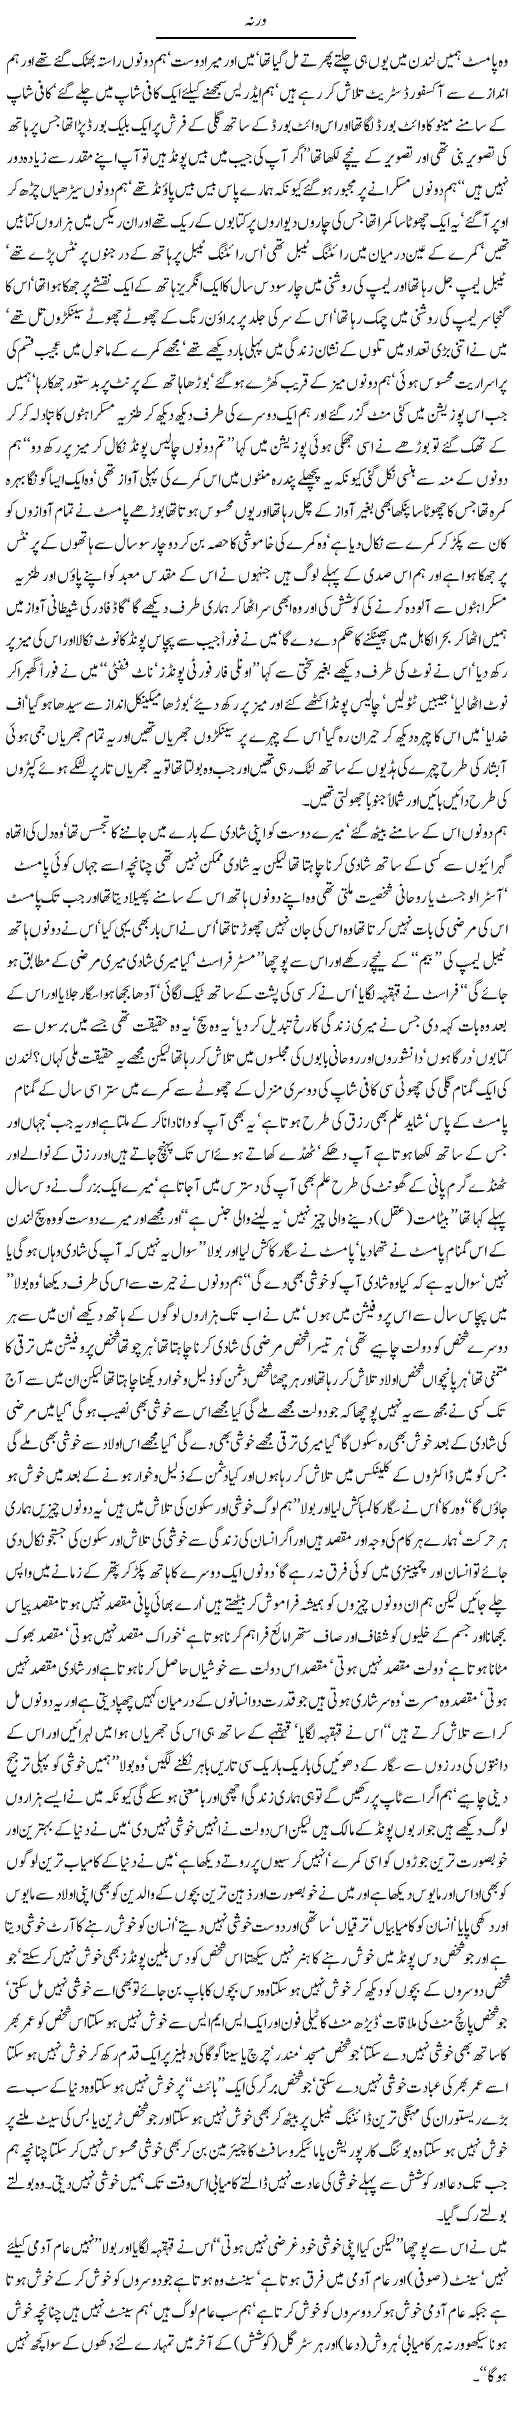 Otherwise Express Column Javed Chaudhry 9 September 2010